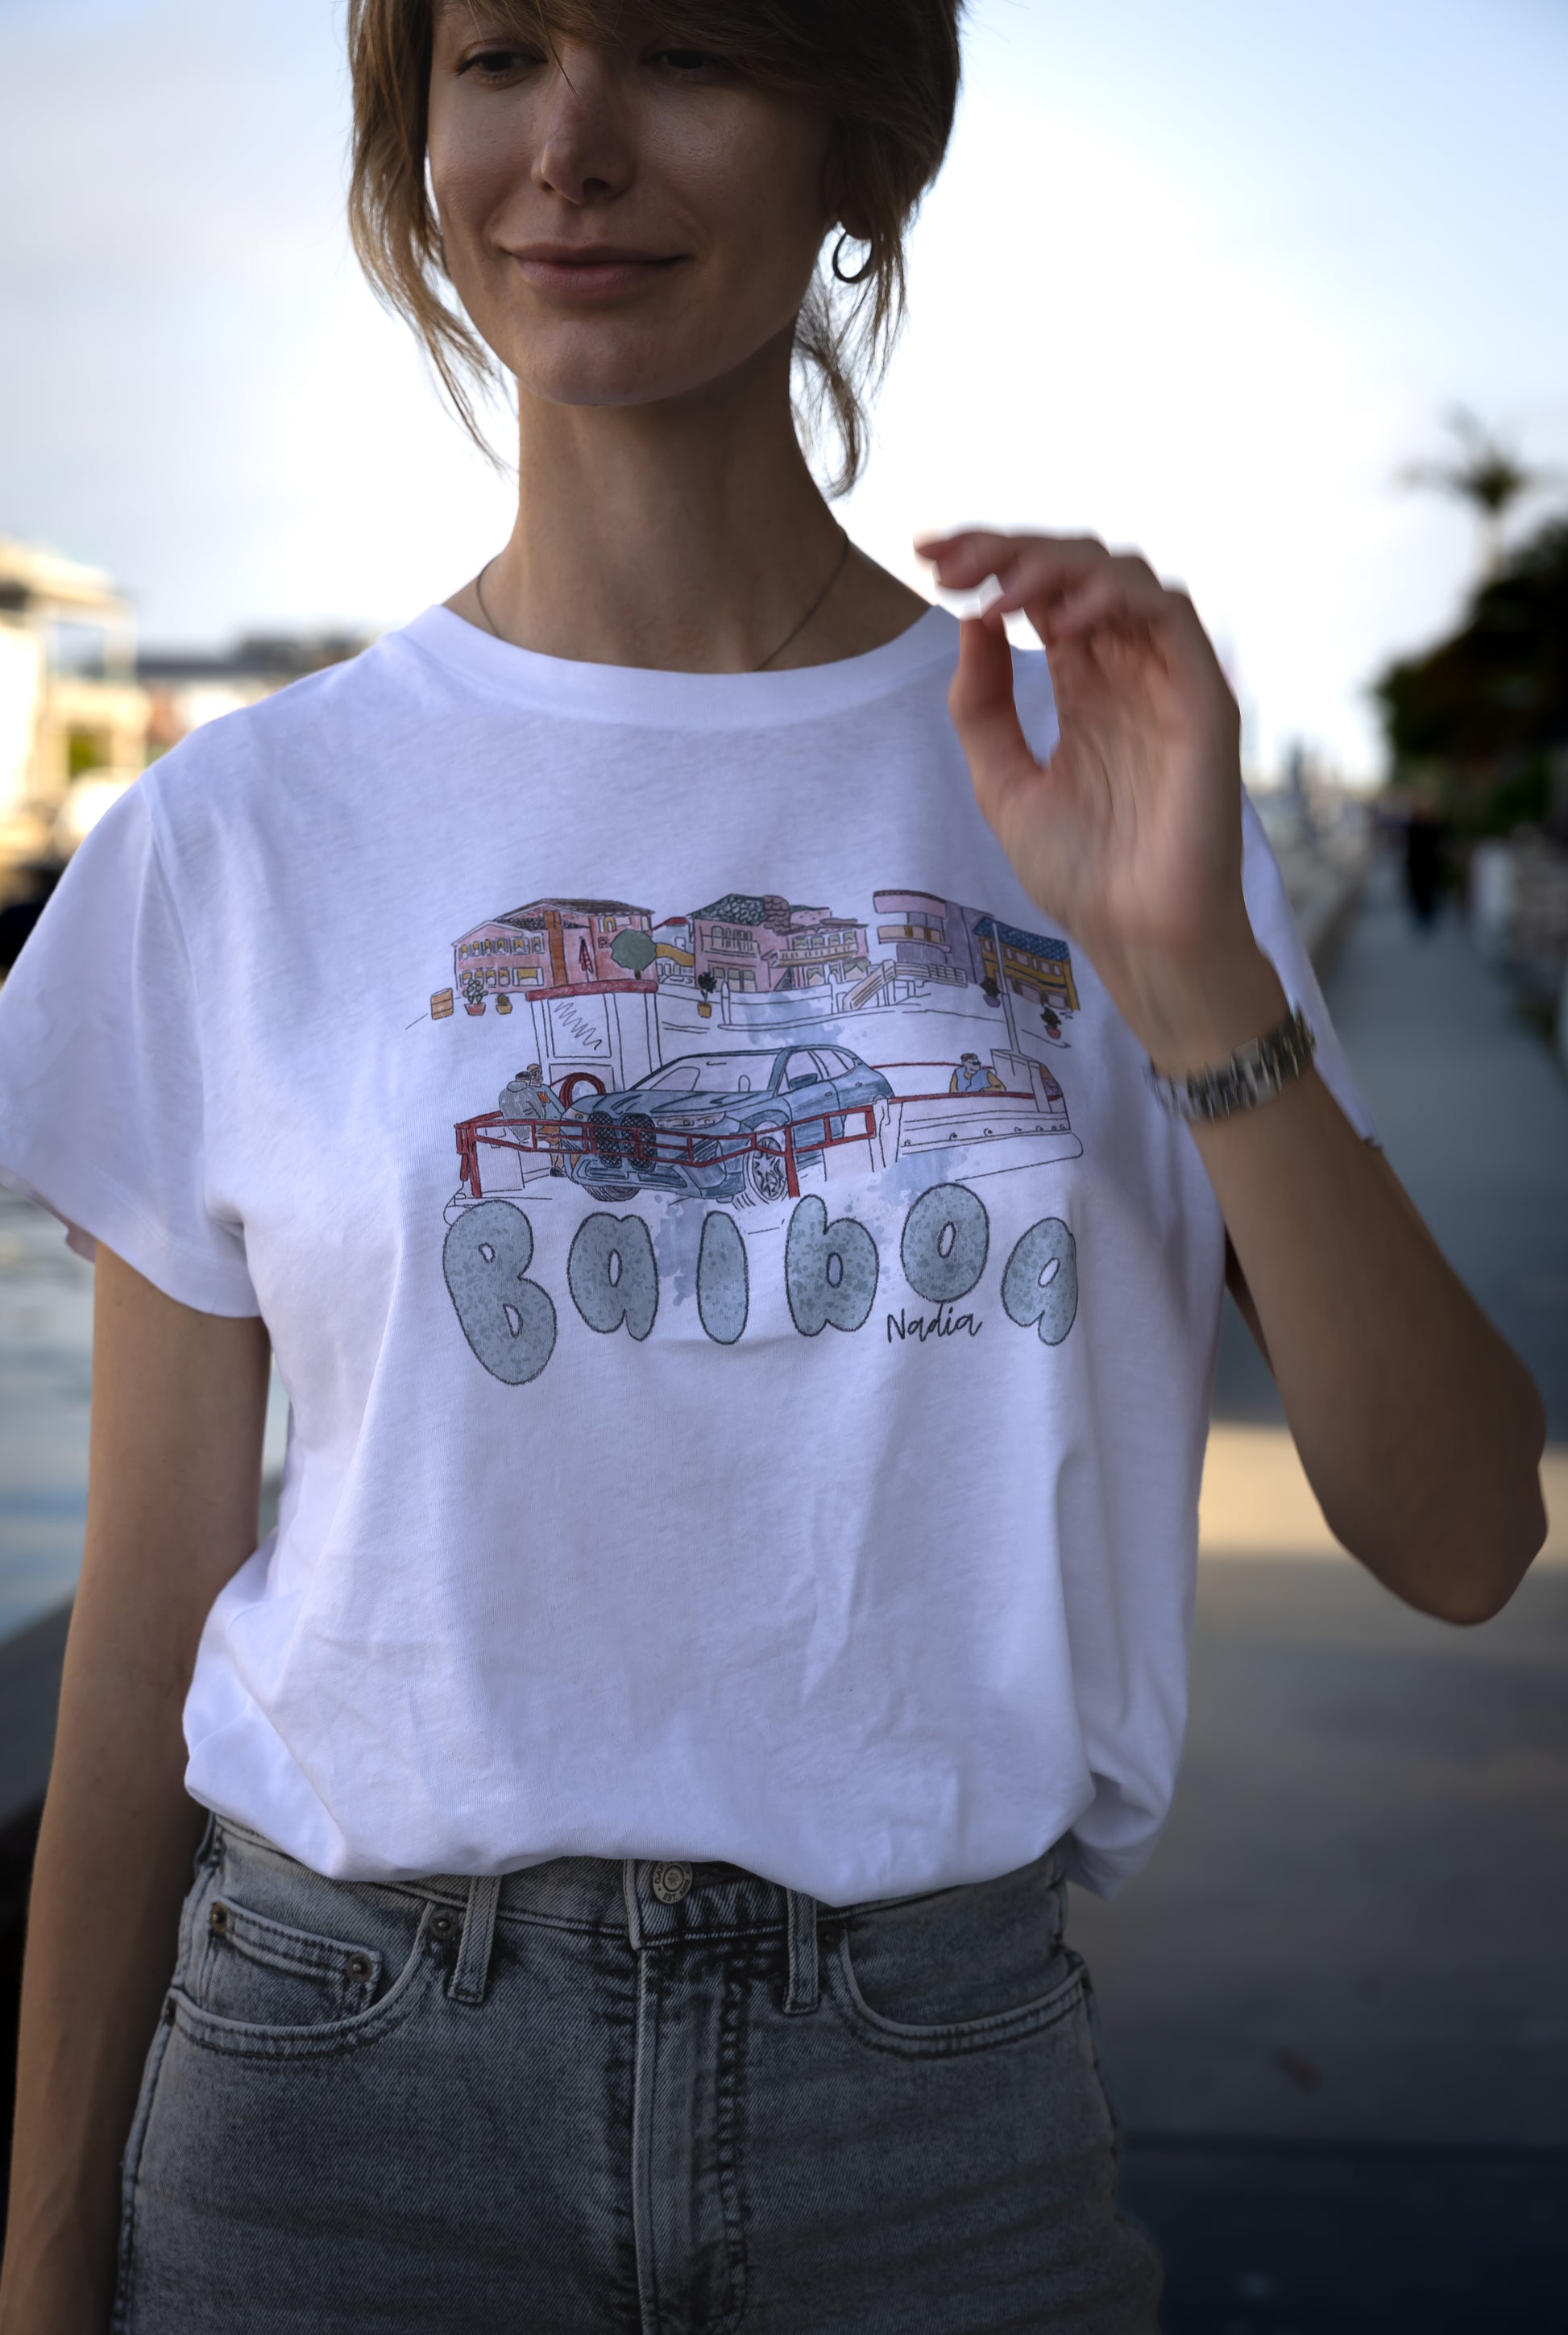 Whether you're running errands, meeting friends for coffee, or just lounging by the beach, this tee is sure to make a splash.